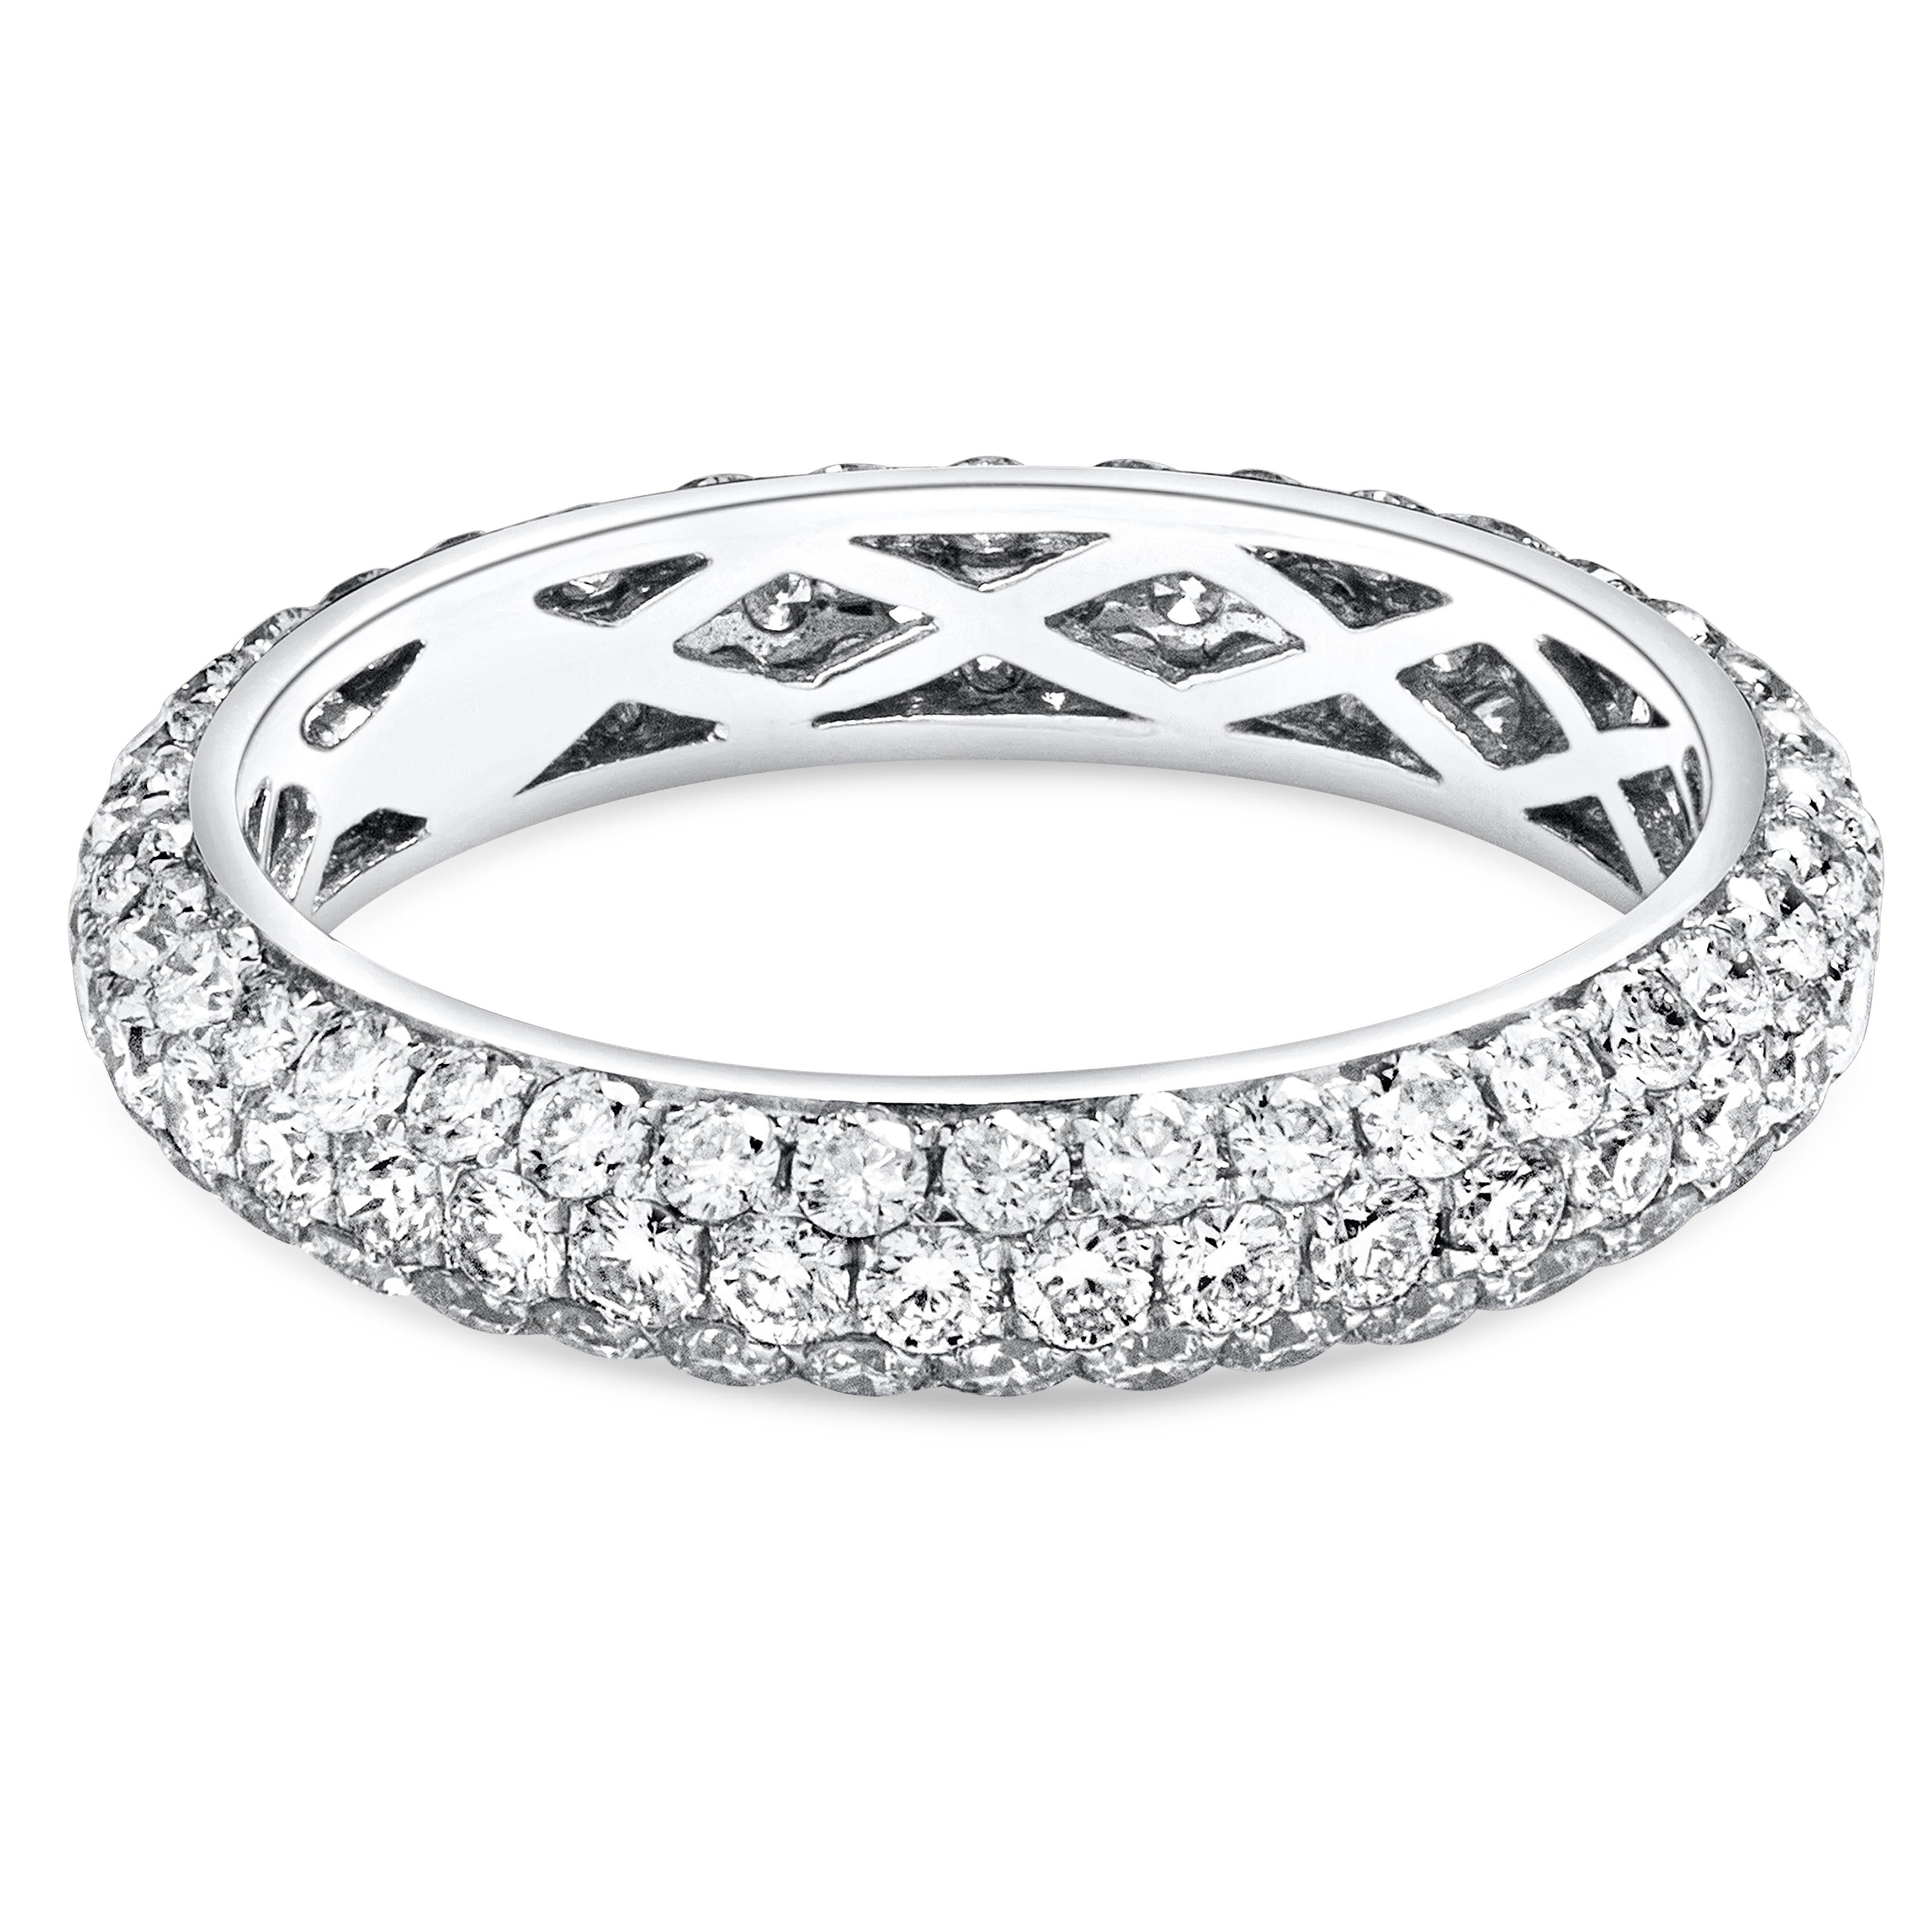 A unique three-row eternity wedding band ring showcasing brilliant round diamonds weighing 1.78 carats total. Set in a rounded micro-pave setting, Made with 18K White Gold, Size 6.5 US

Roman Malakov is a custom house, specializing in creating